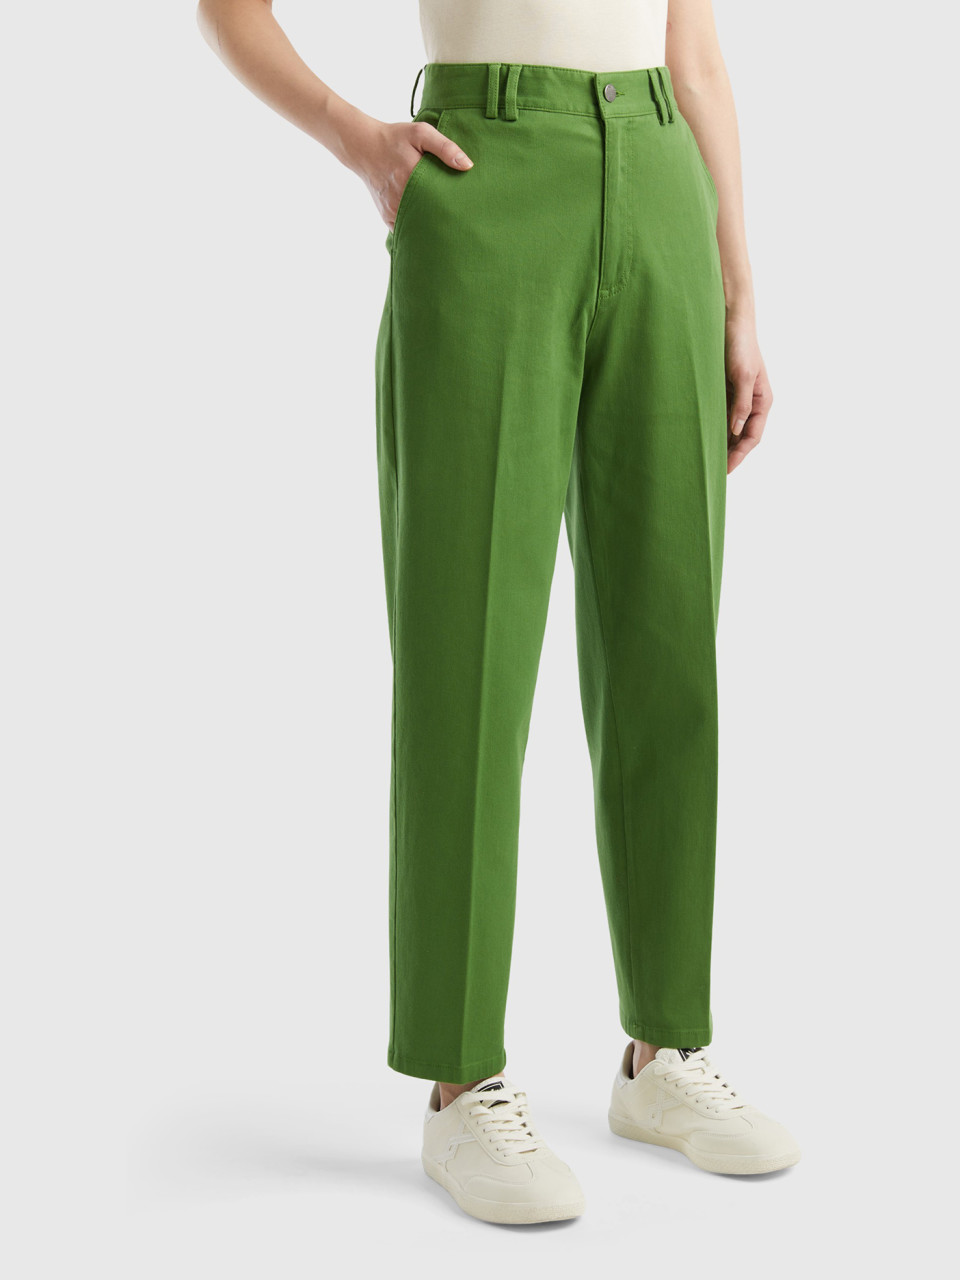 Benetton, Chino Trousers In Cotton And Modal®, Military Green, Women